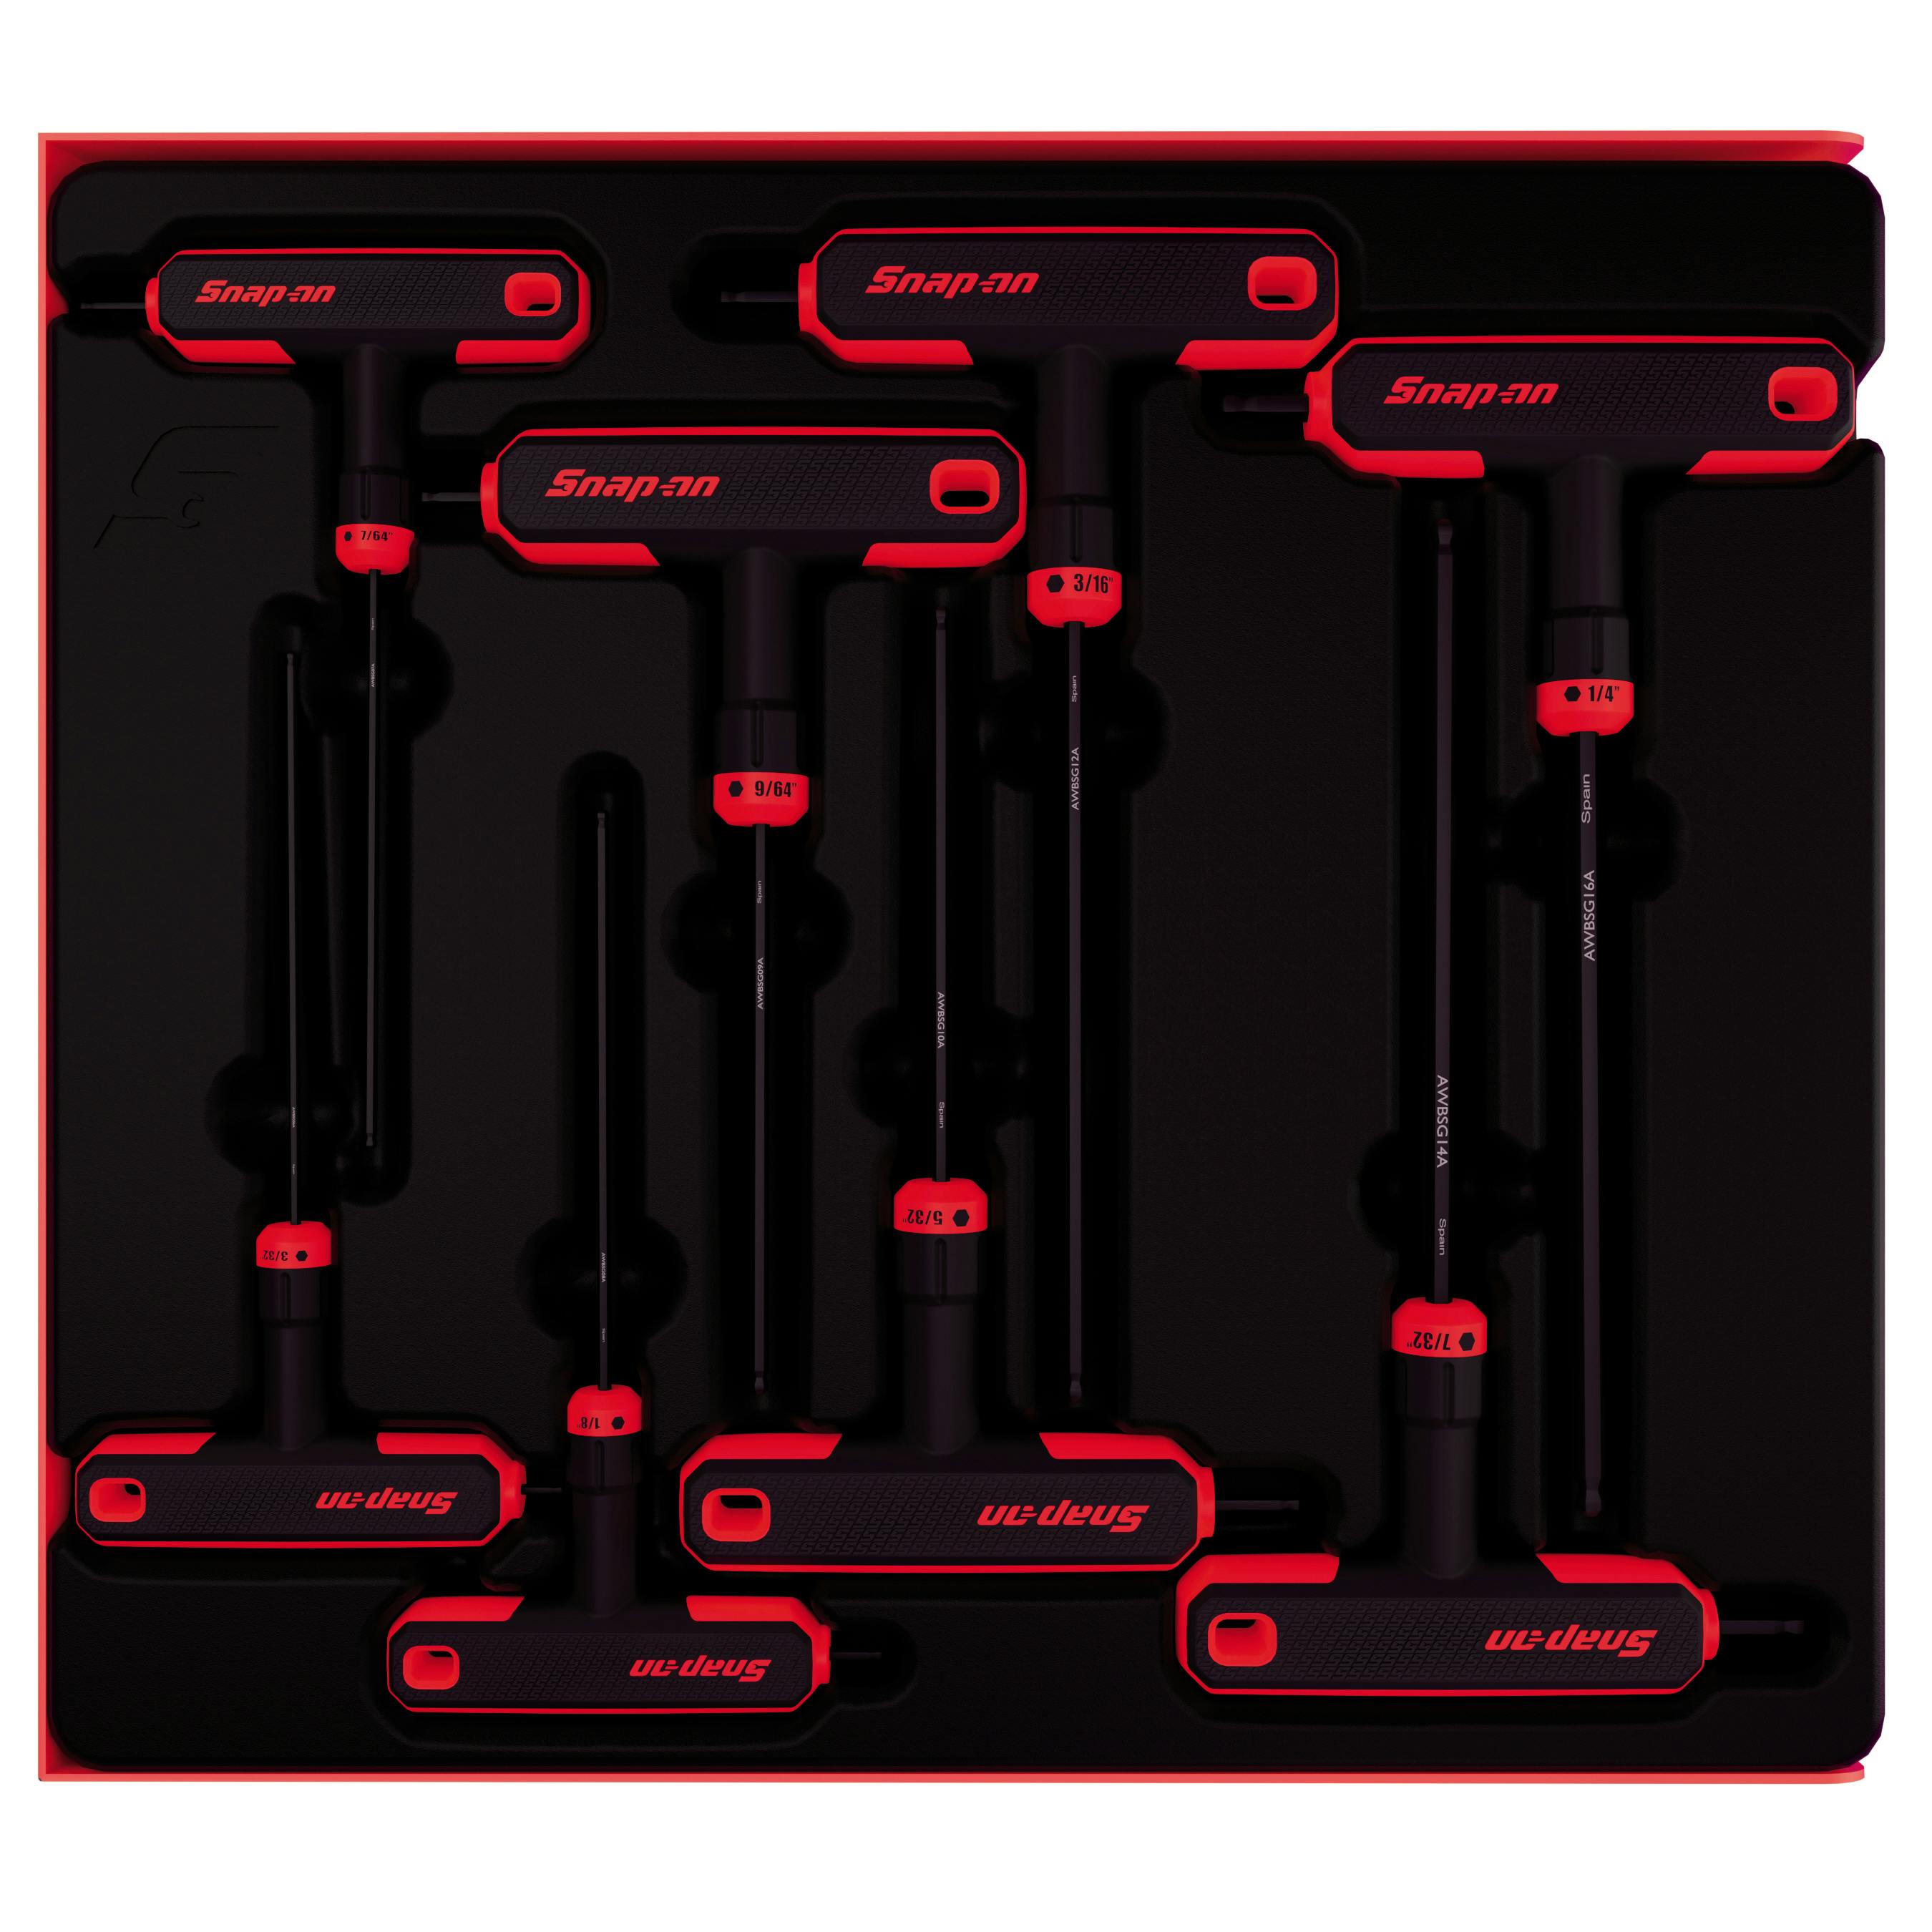 SAE Details about   *NEW* Snap On AWSG800A 8 Pc T-Handle/L-Shaped Hex Combo Soft Grip